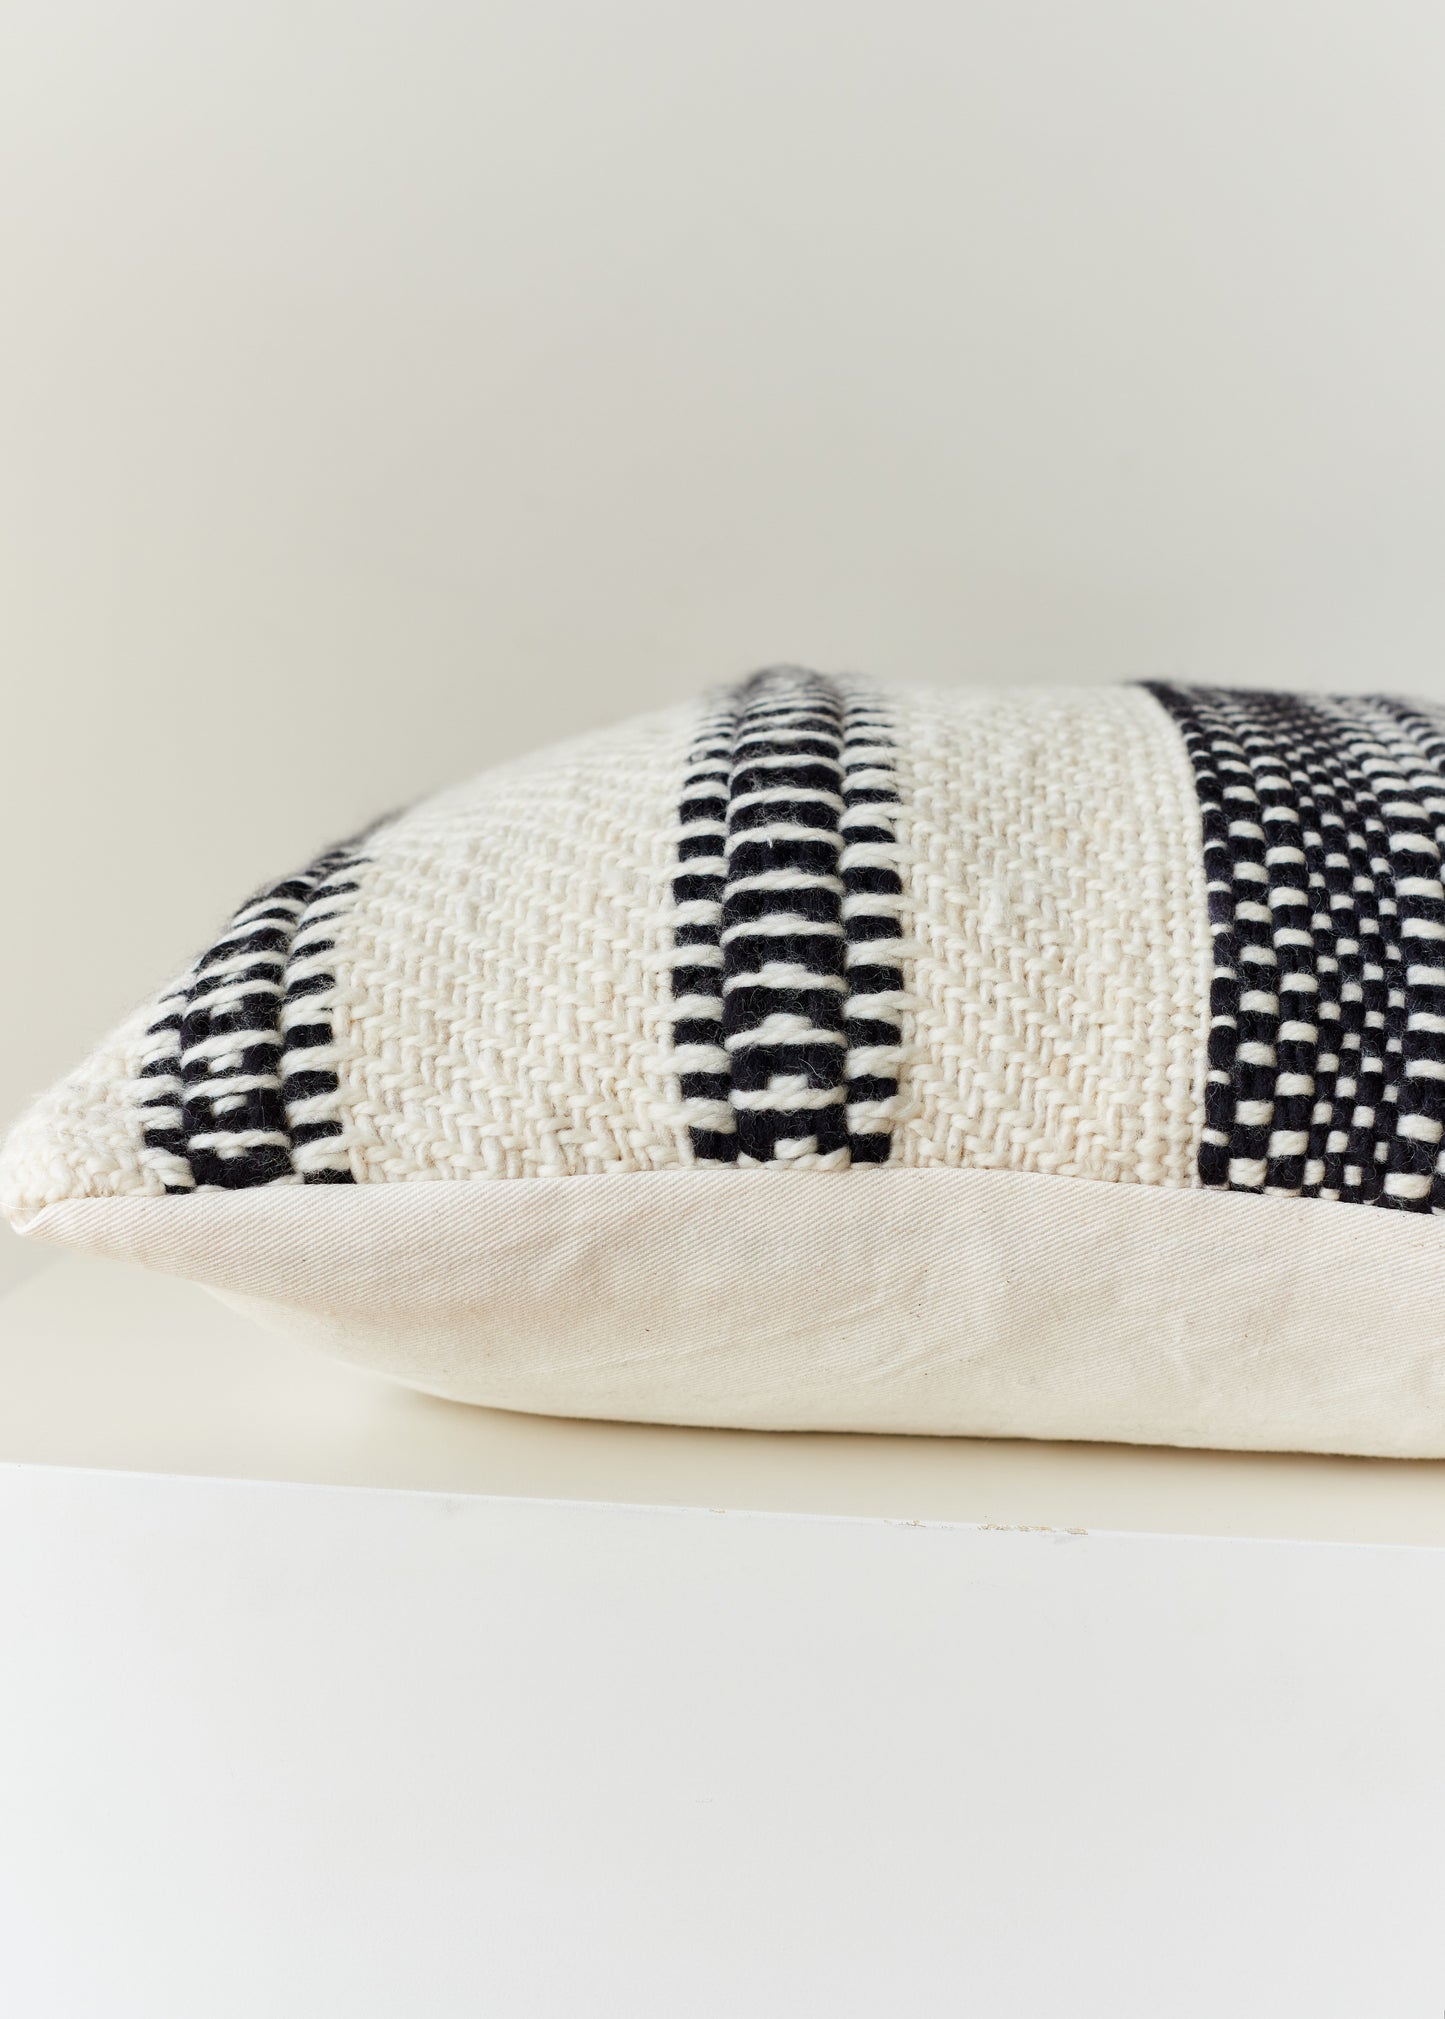 Lumbar Cover Pillow in Black & White Ceres 16x20